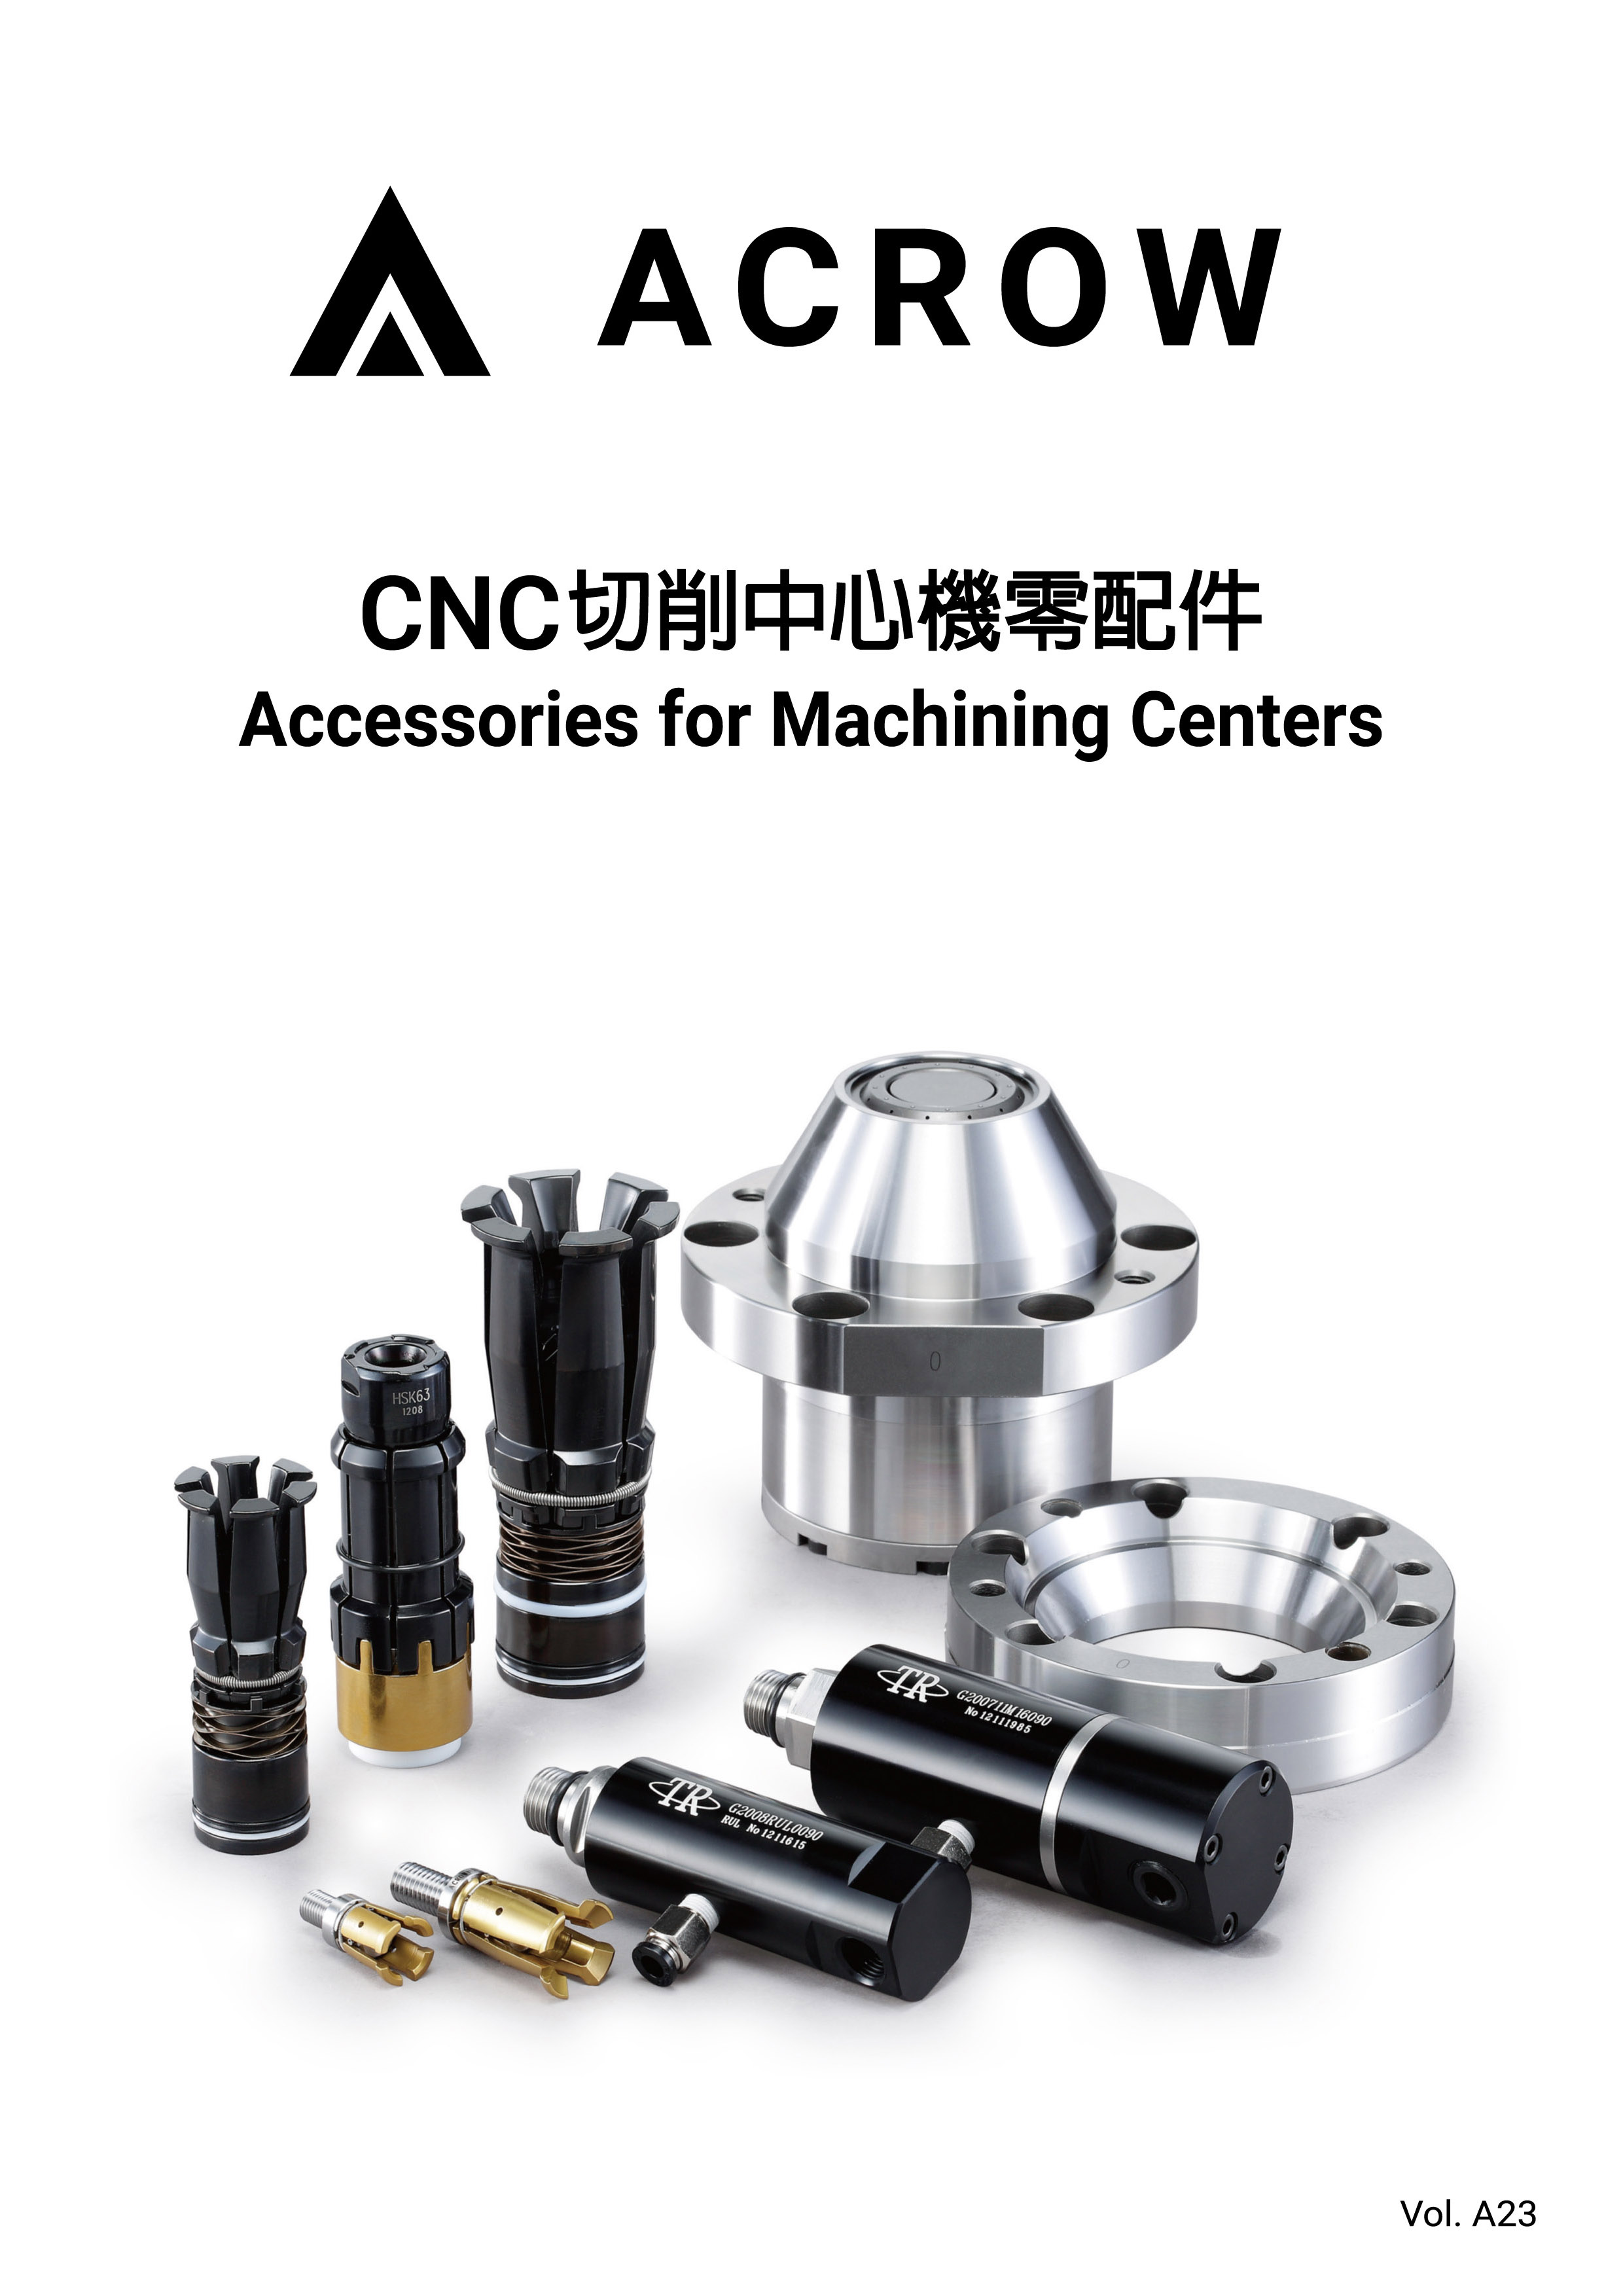 CNC Accessories for Machining Centers